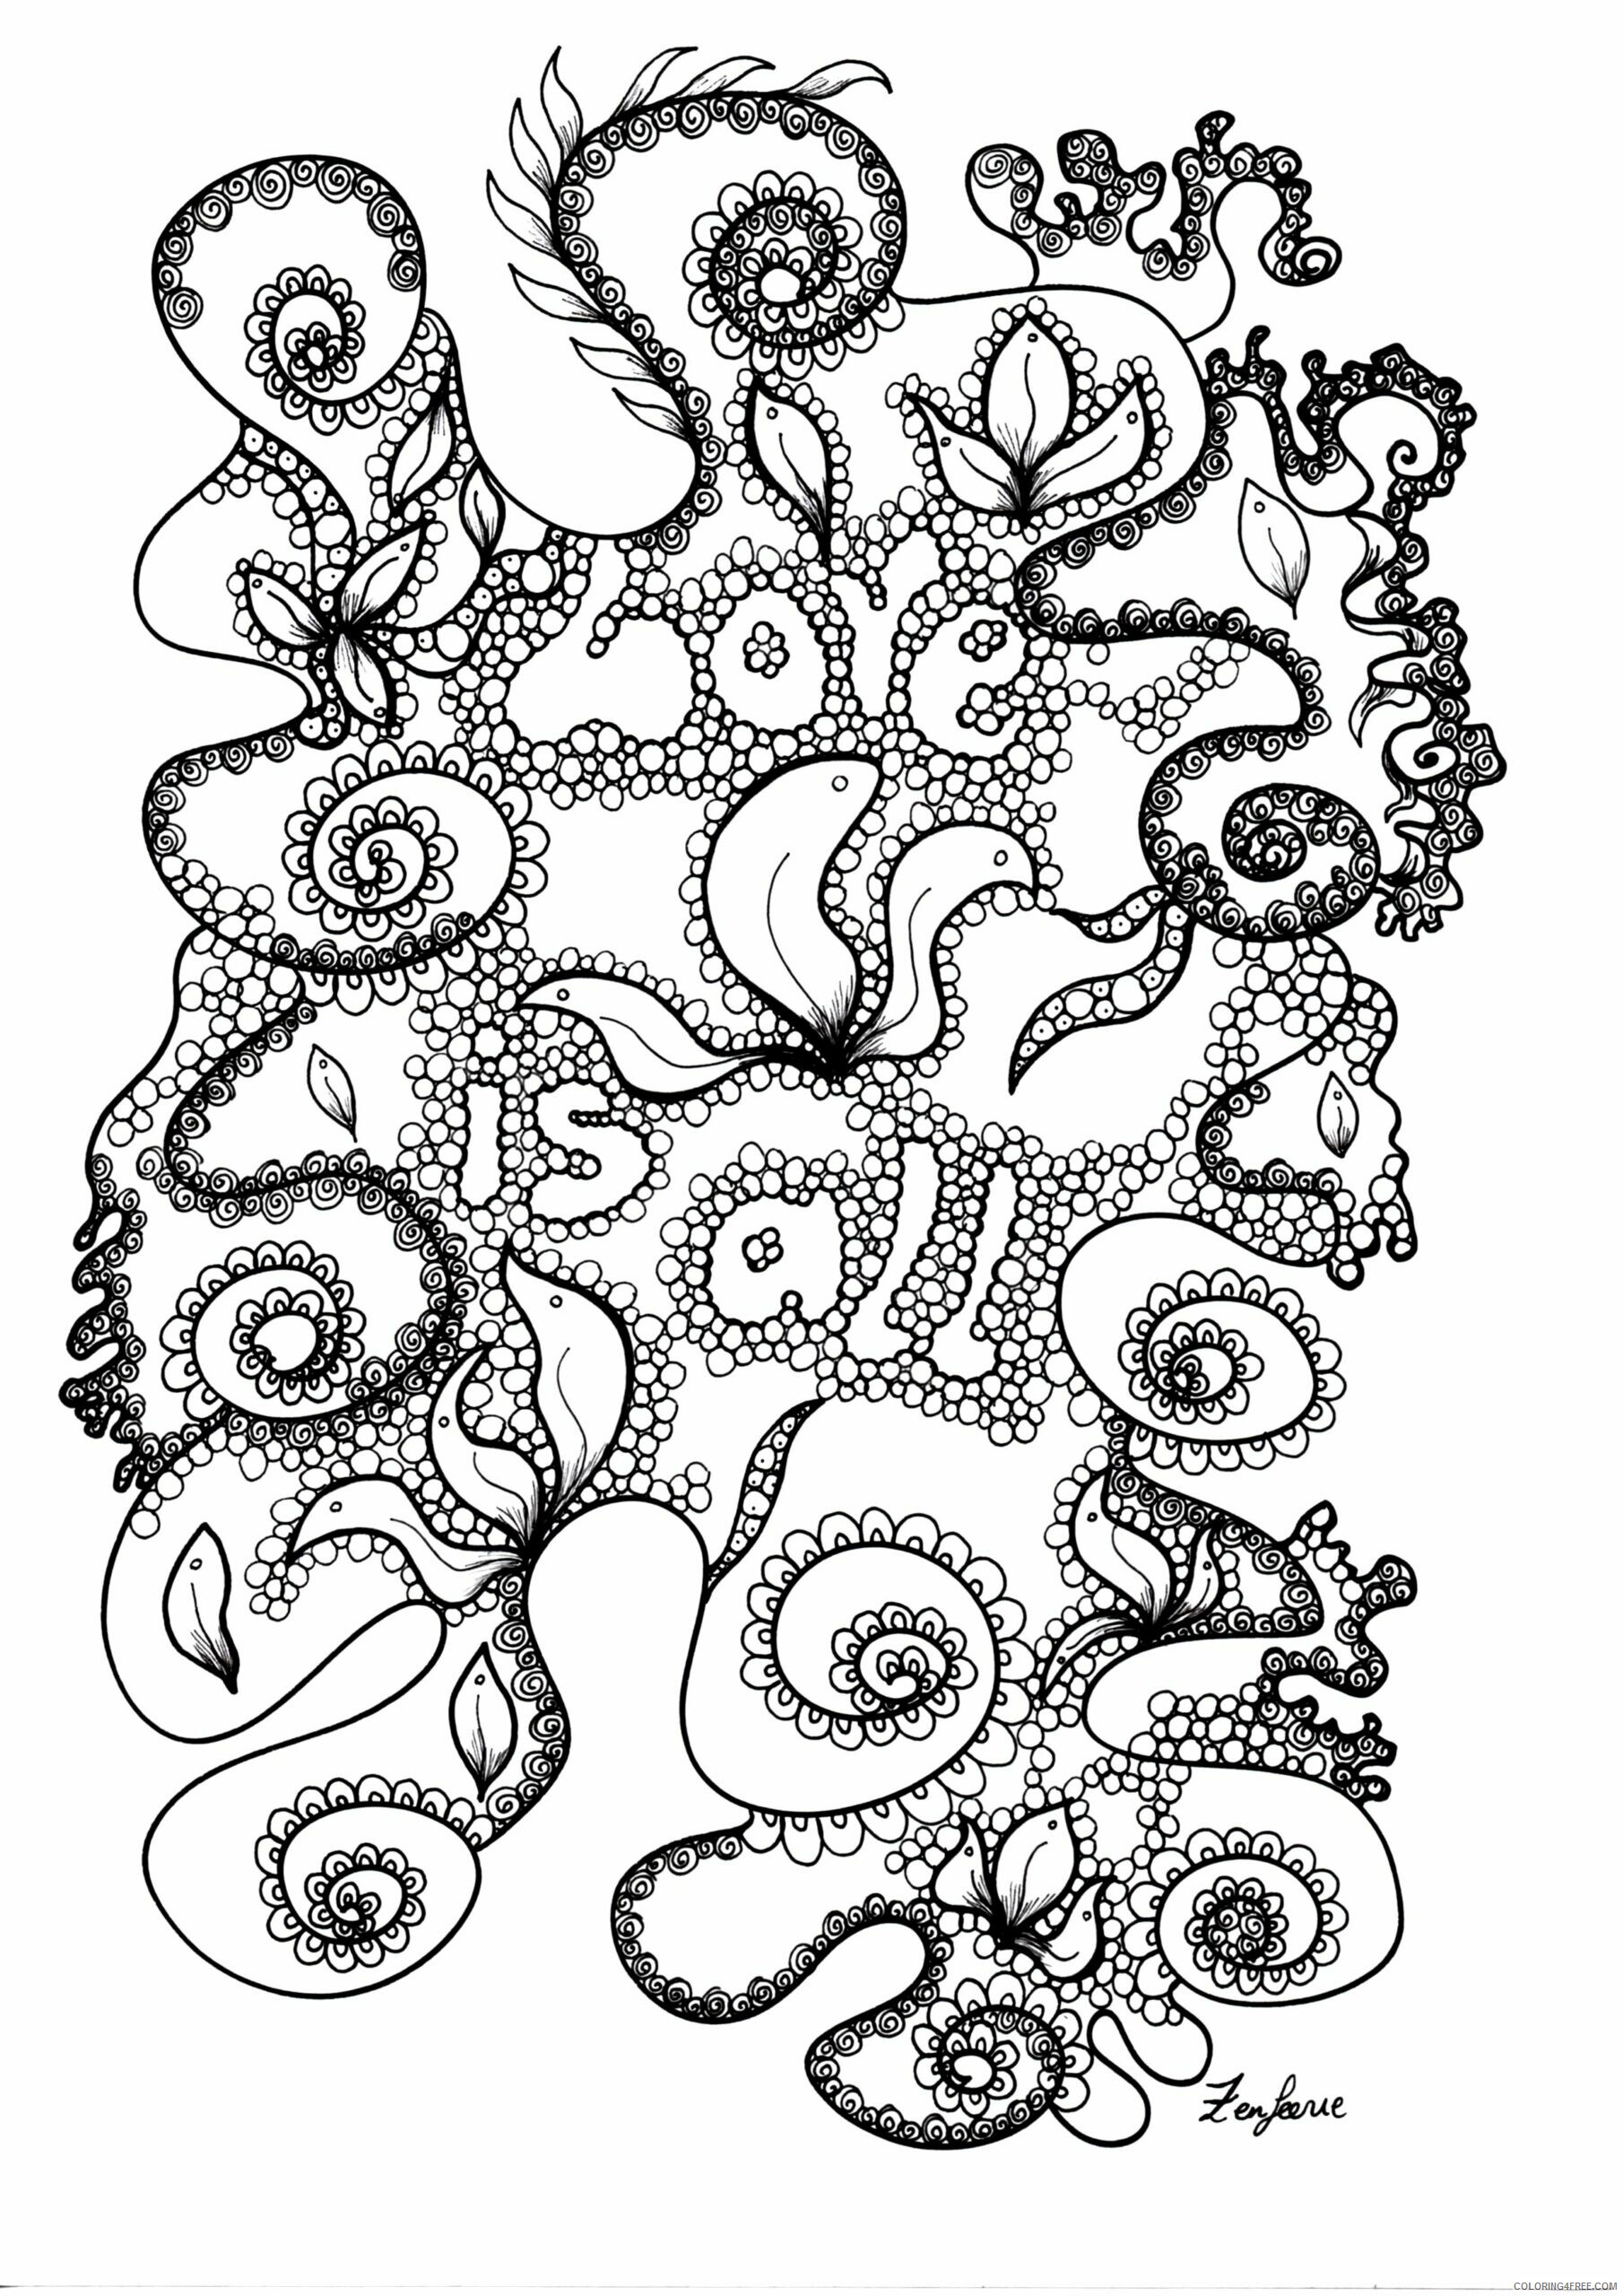 Adult Zentangle Coloring Pages coloriage adulte love is all by zenfeerie Printable 2020 115 Coloring4free